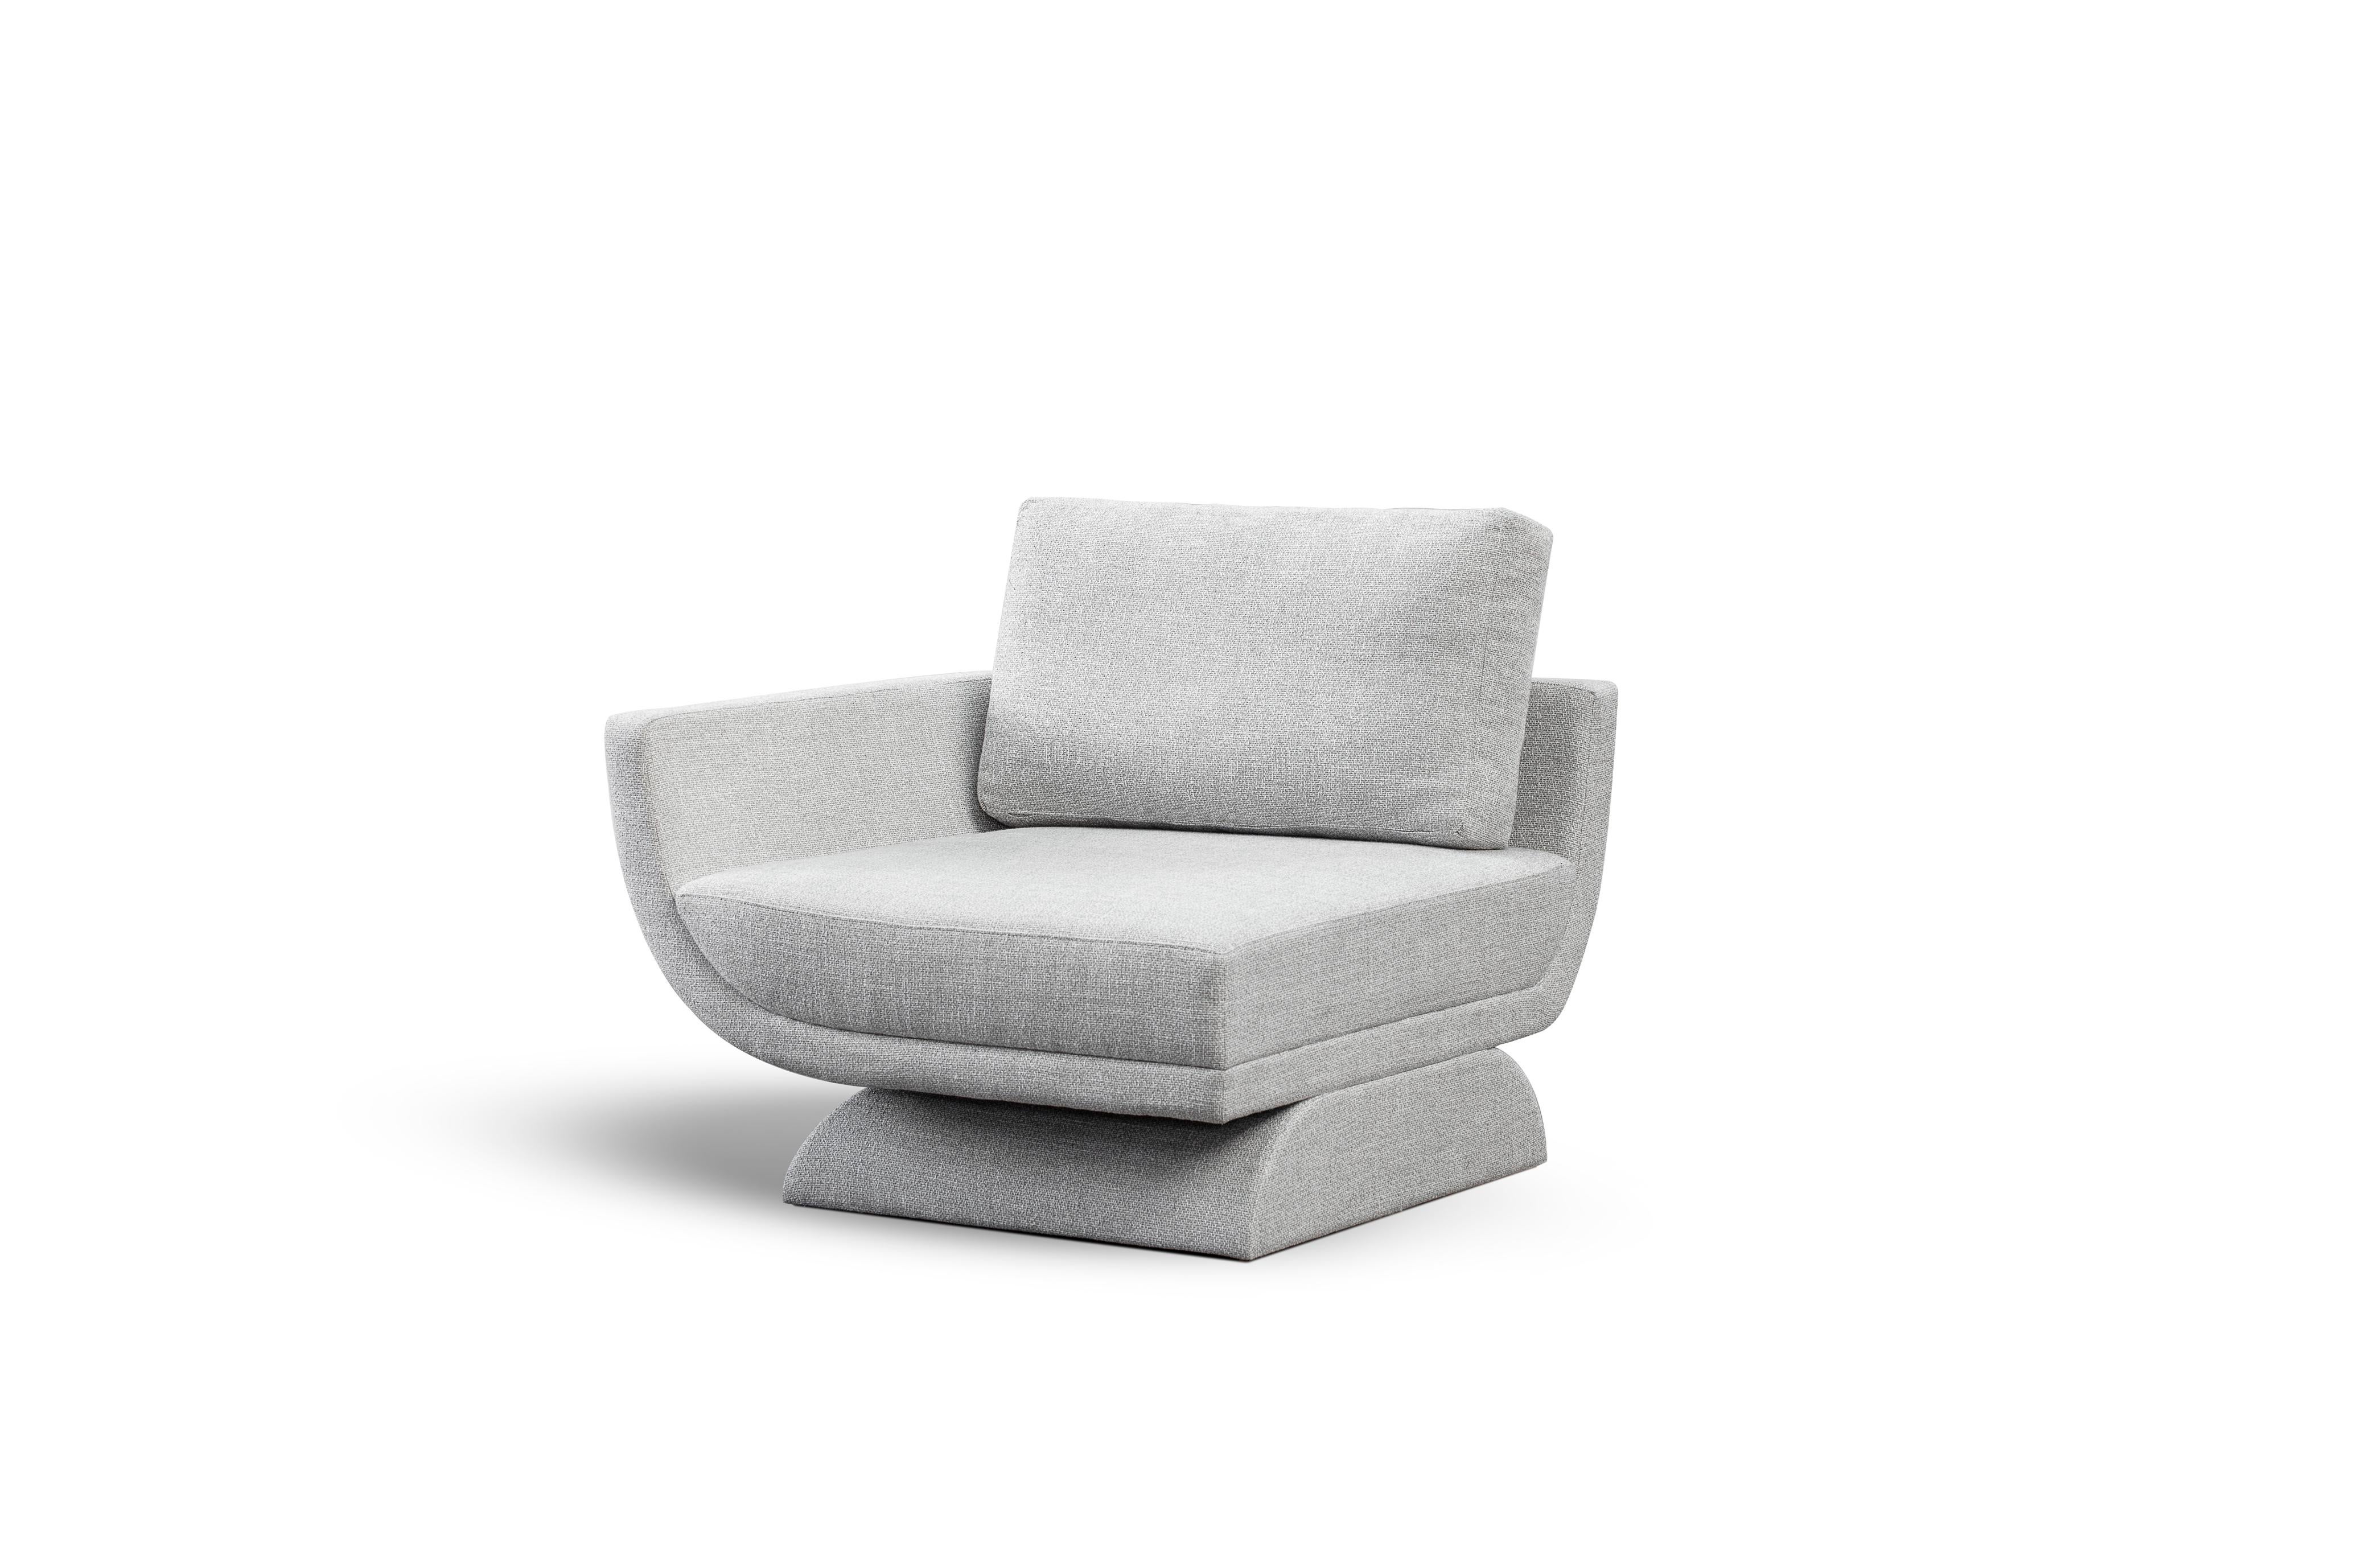 Oscar End Modular Sofa by DUISTT 
Dimensions: W 115 x D 105 x H 84 cm
Materials: Duistt Fabric

Inspired by the curved lines poetry of Oscar Niemeyer’s architecture, OSCAR modular sofa allures for its sensual and free-flowing curves. Like Niemeyer